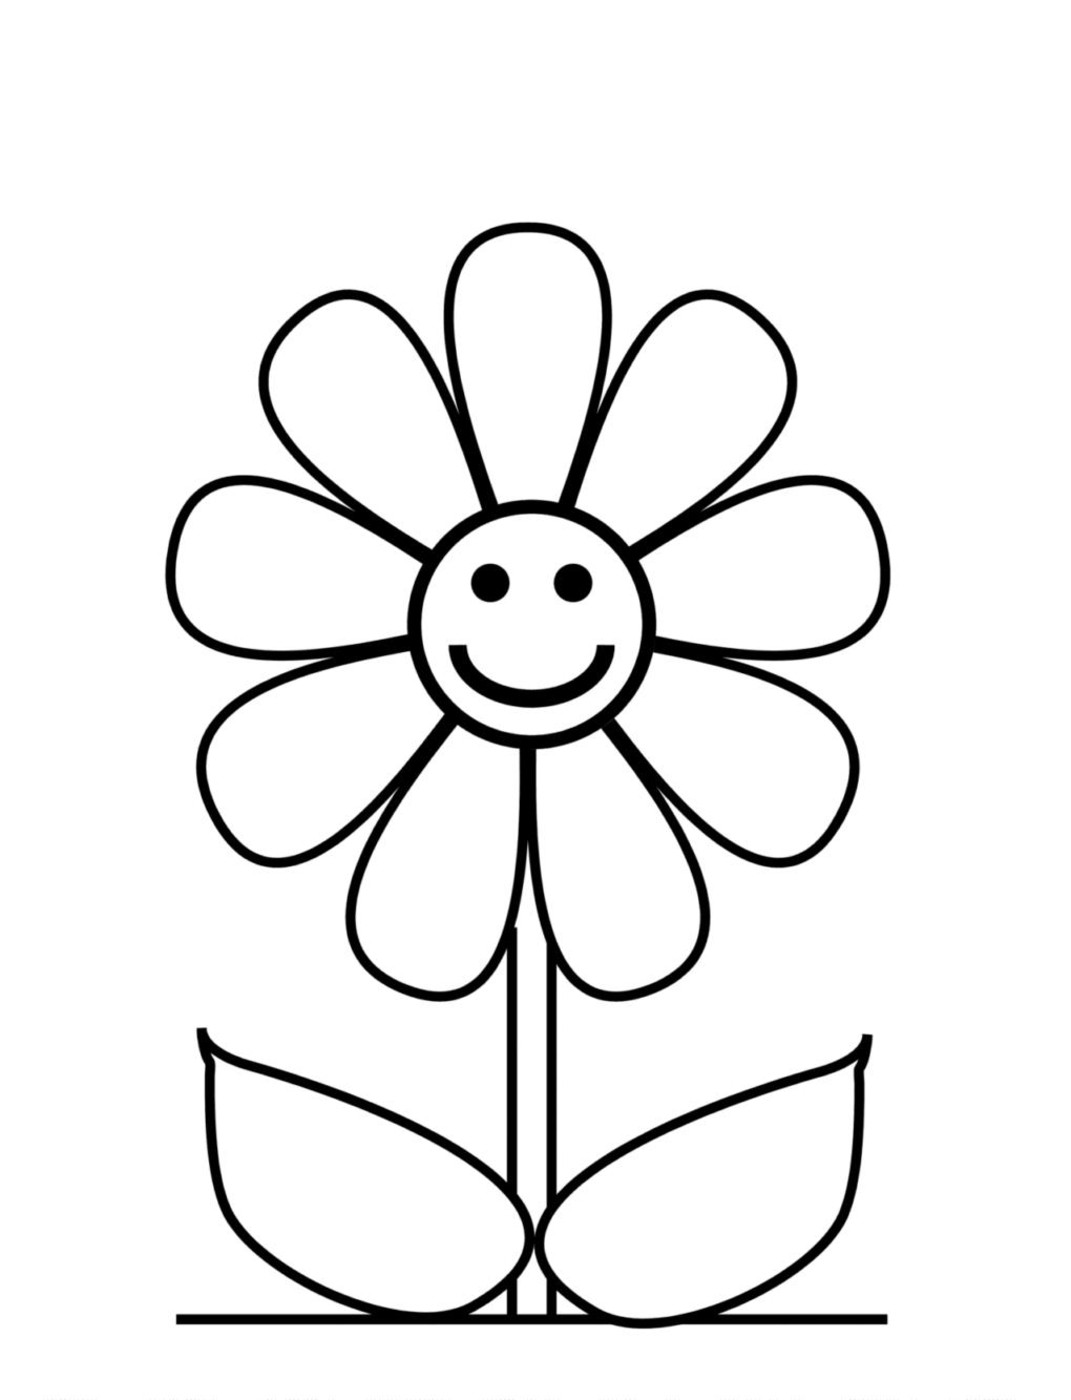 Flower Coloring Pages  Free Printable Flower Coloring Sheets